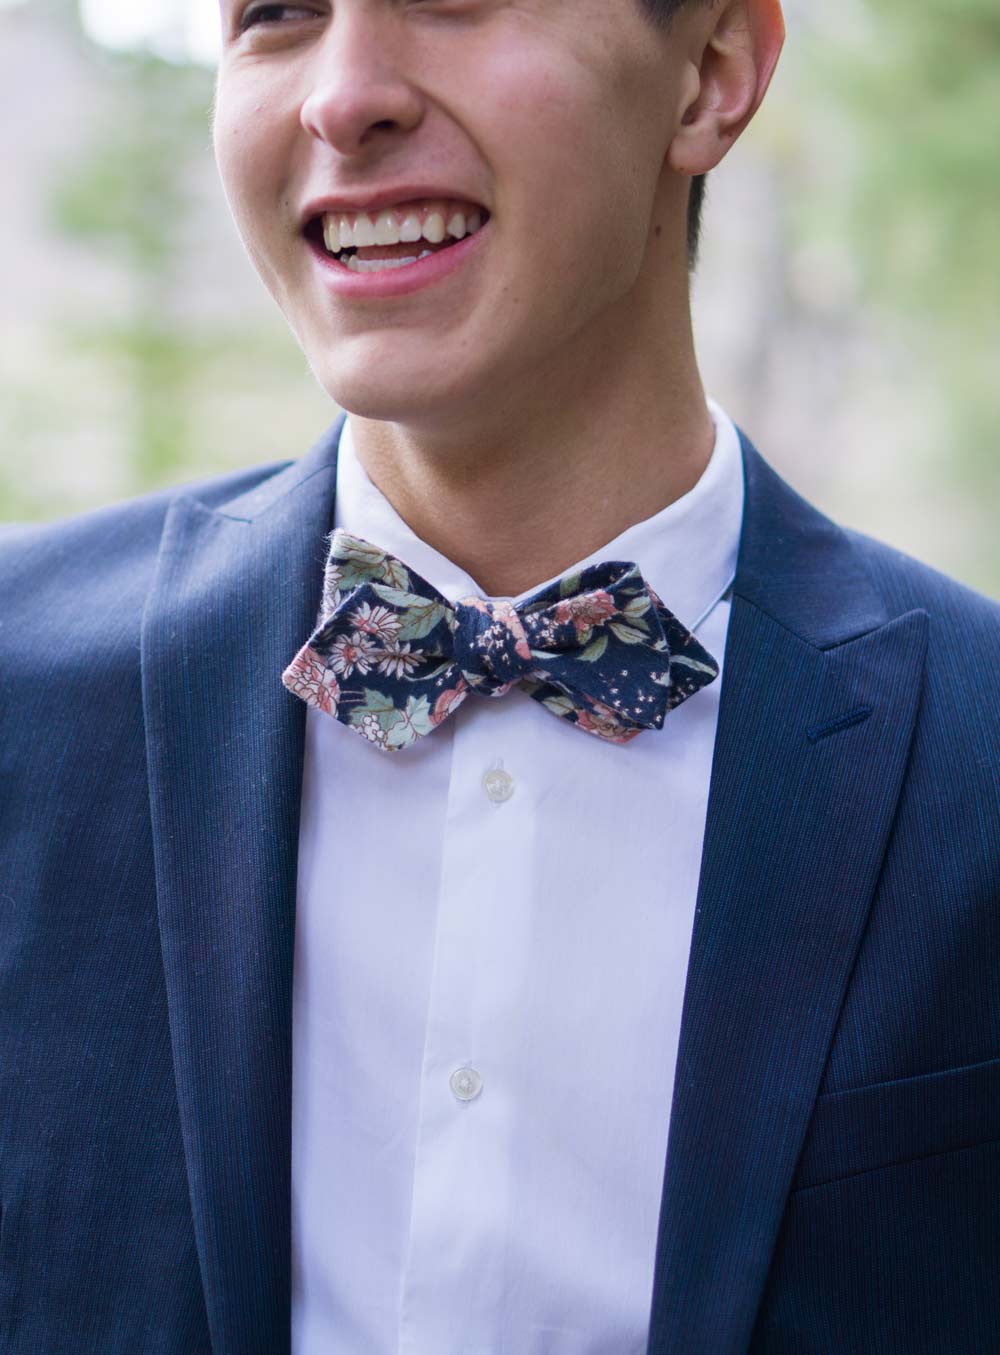 Lotus Bow Tie worn with a white shirt and navy suit jacket.